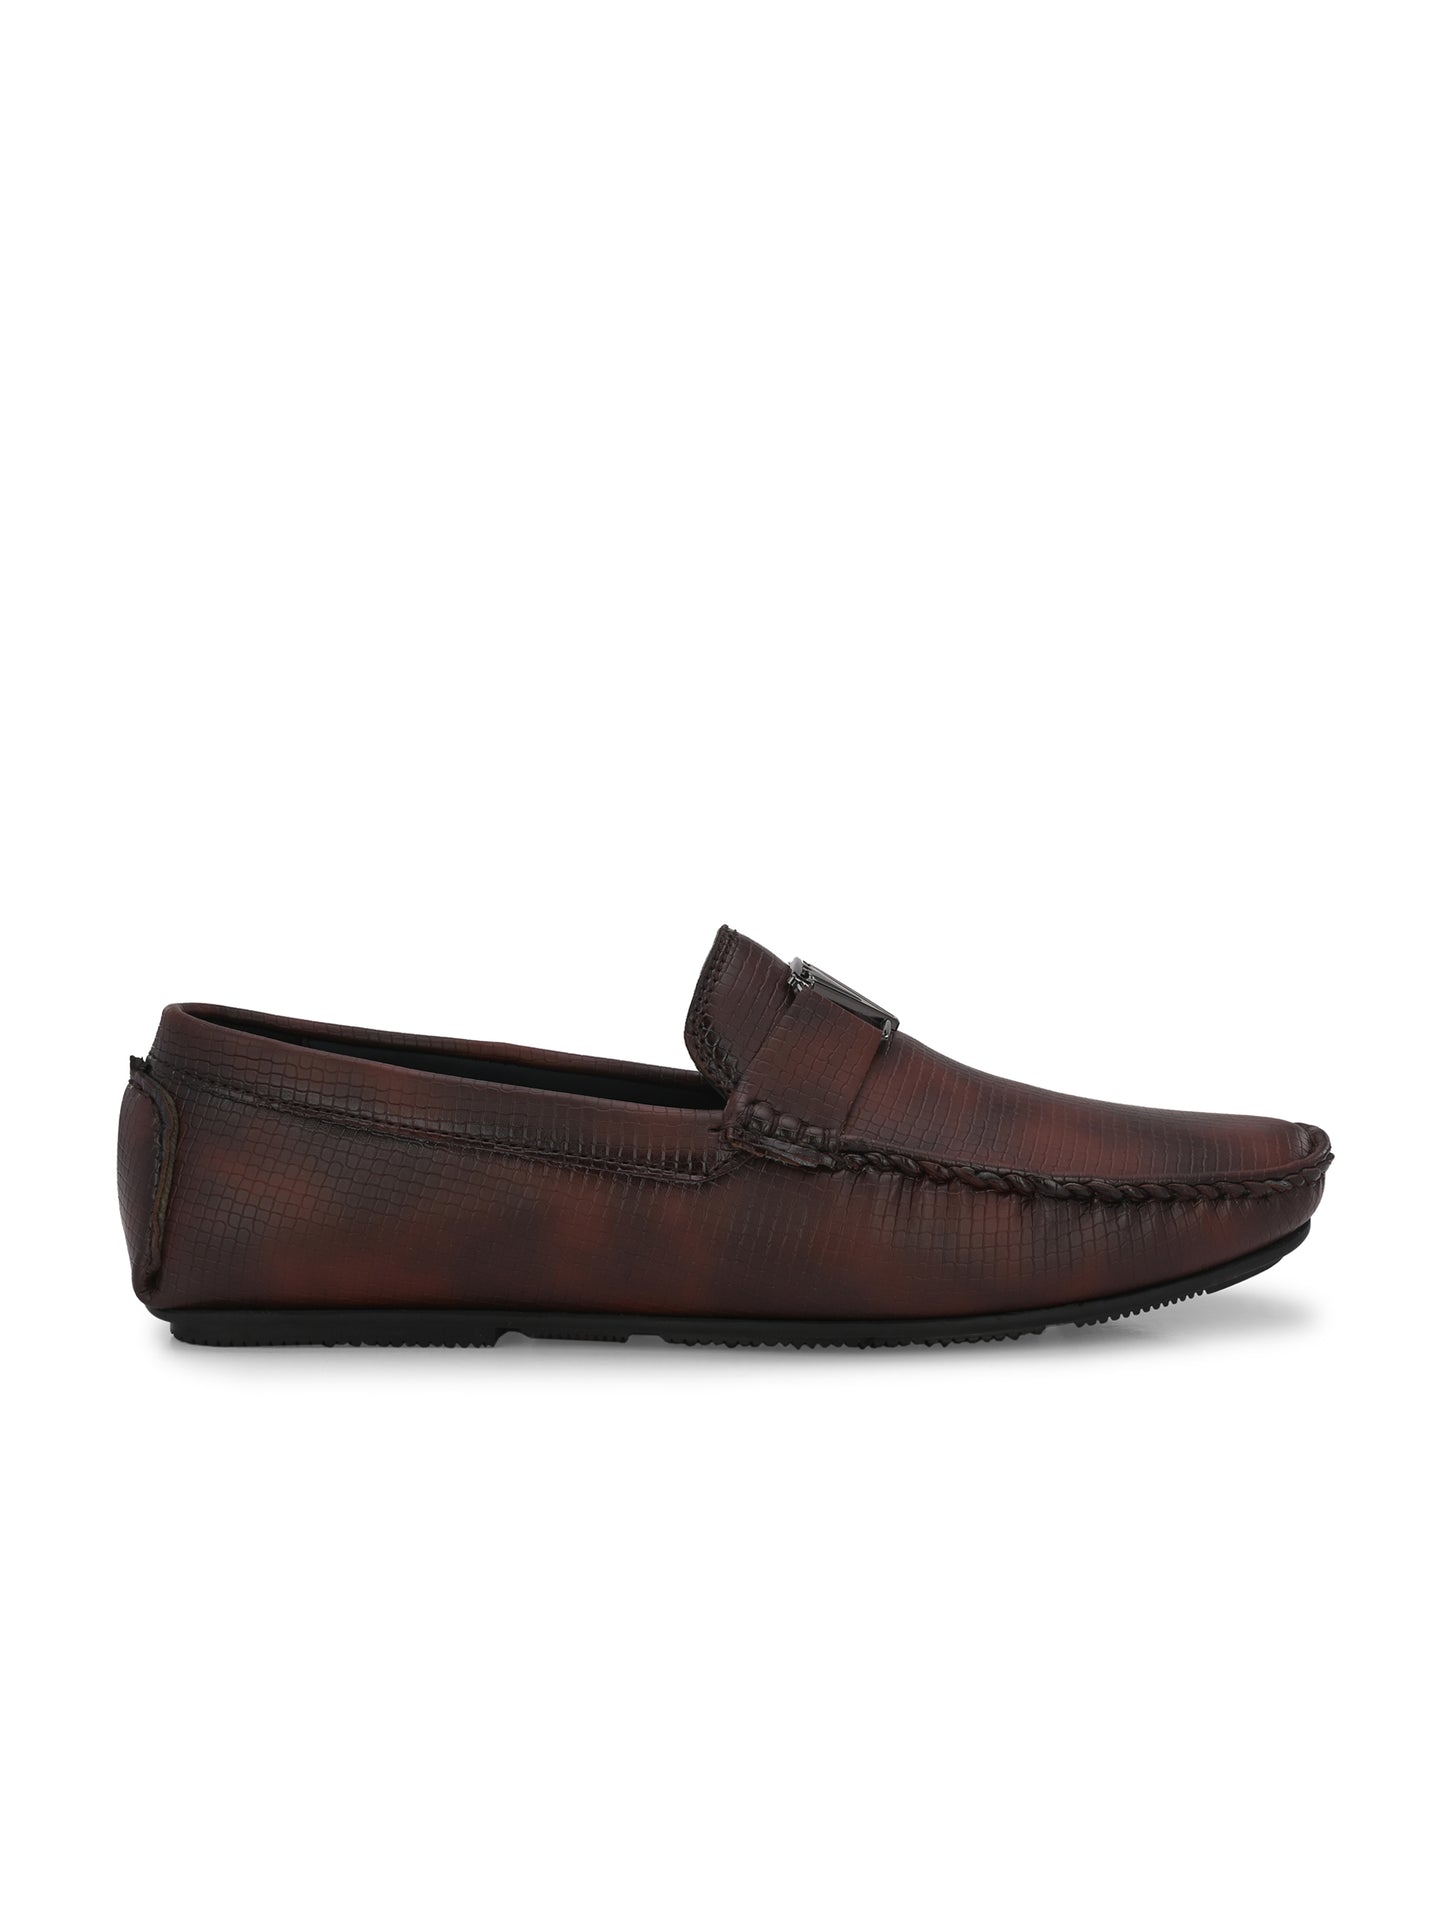 Guava Men's Brown Casual Slip On Driving Loafers (GV15JA827)